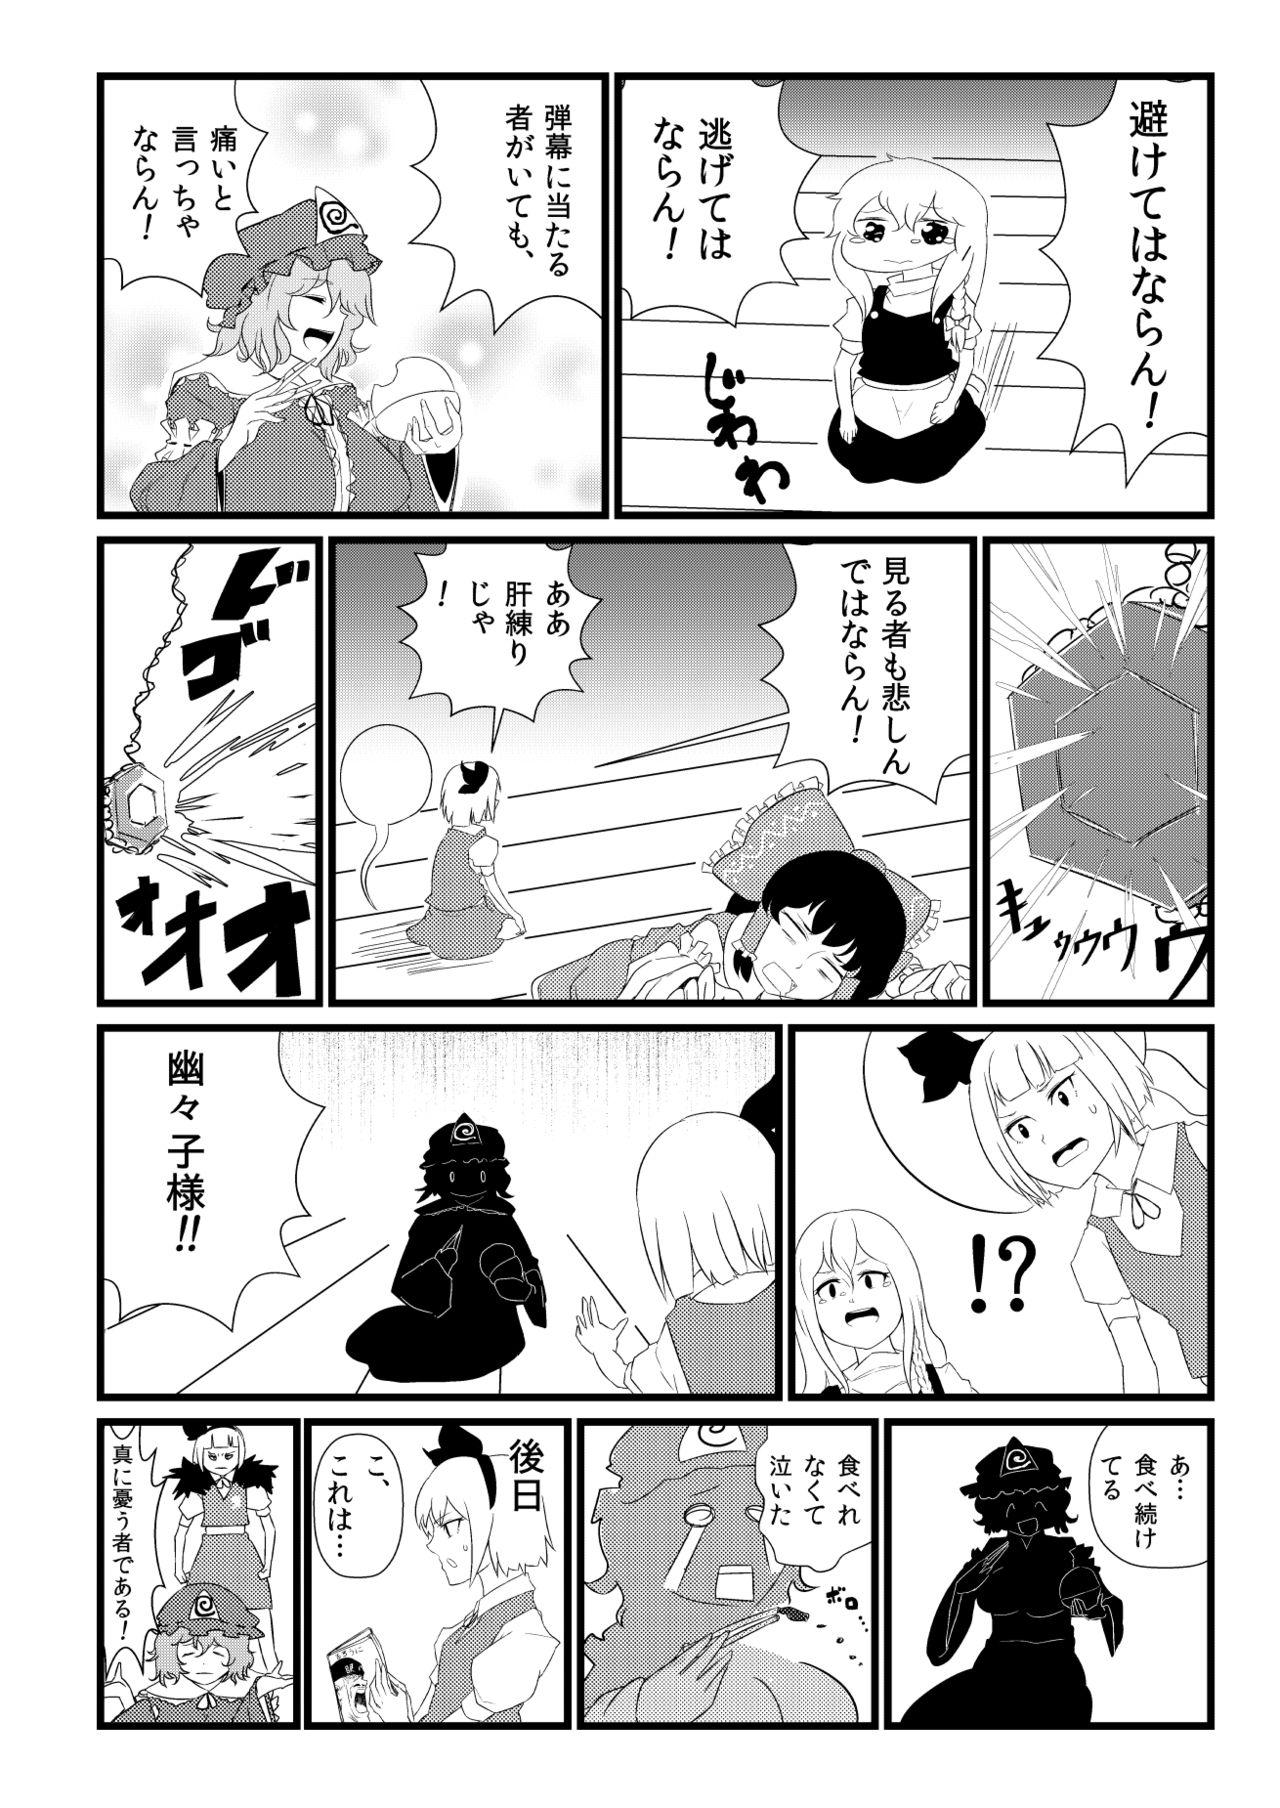 Threeway 東方板としあき合同誌5 - Touhou project Flogging - Page 4